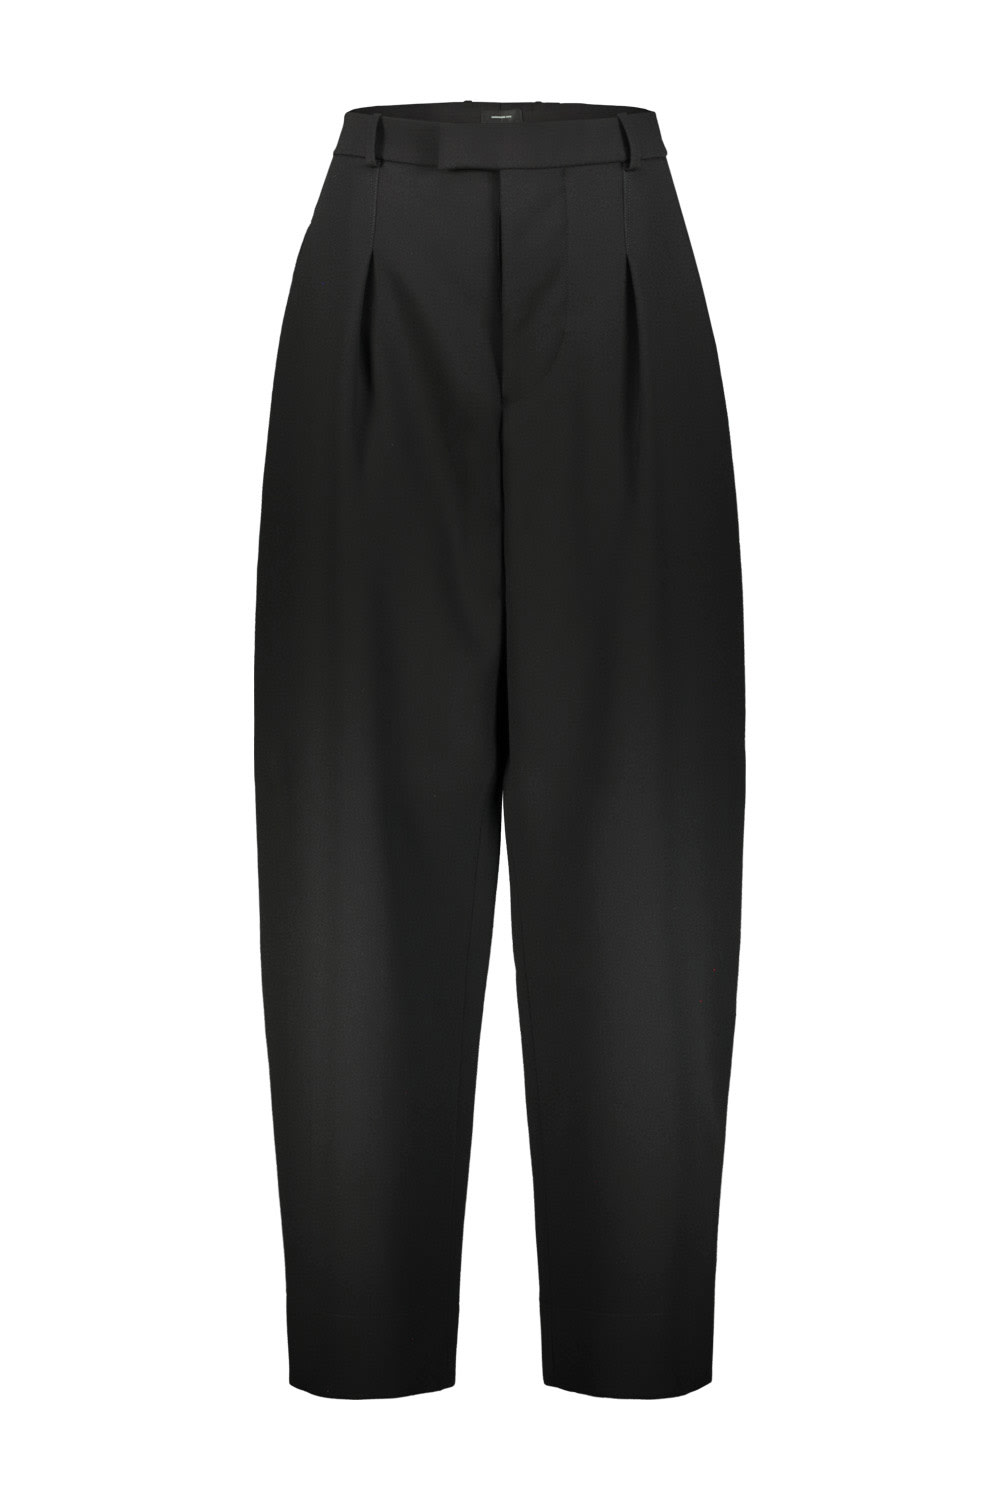 Wardrobe.nyc Hb Trousers In Blk Black